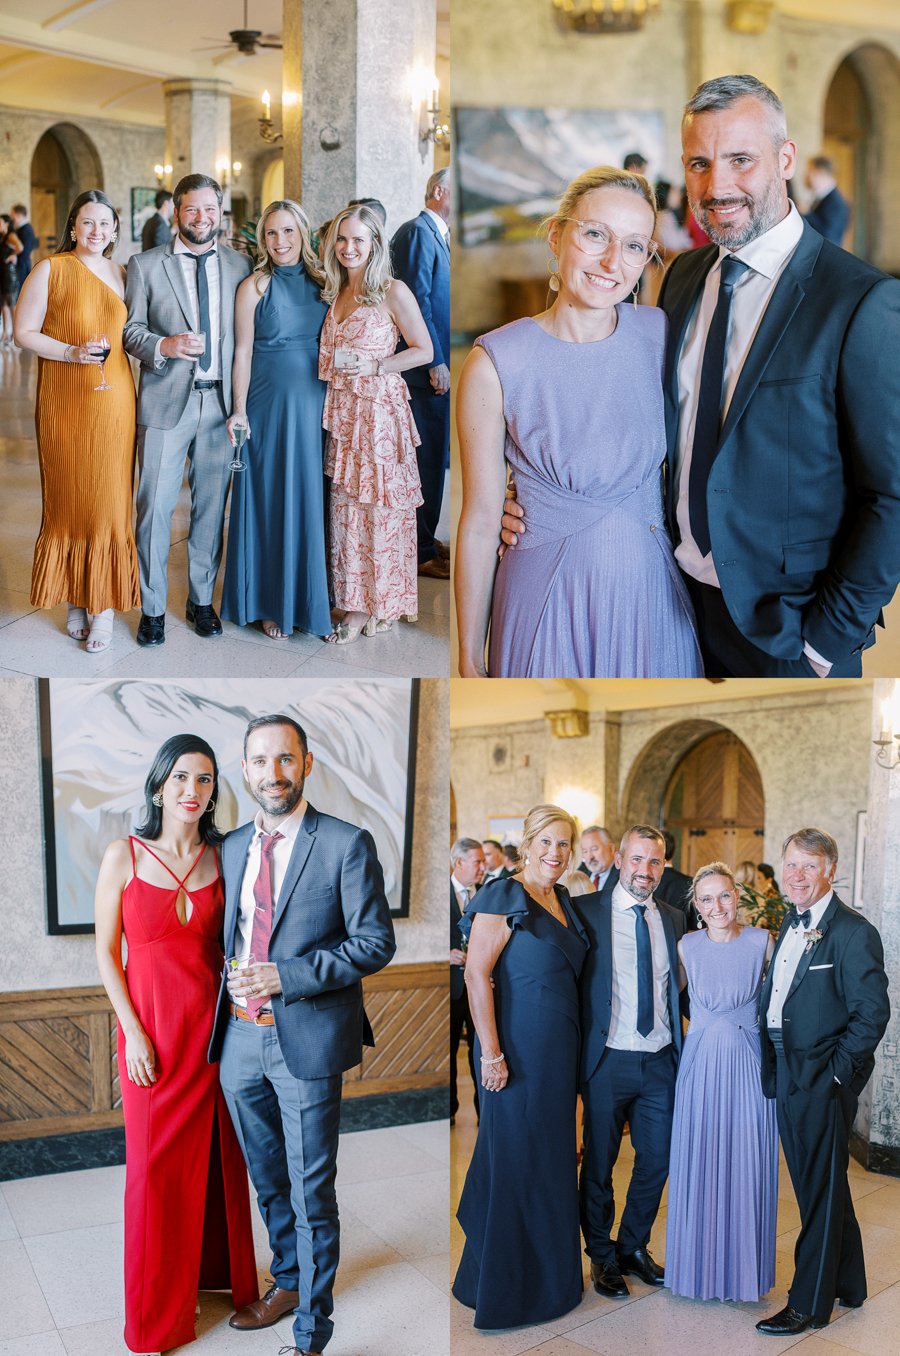 guest group portraits at the cocktail hour at the Fairmont Banff Springs wedding reception.